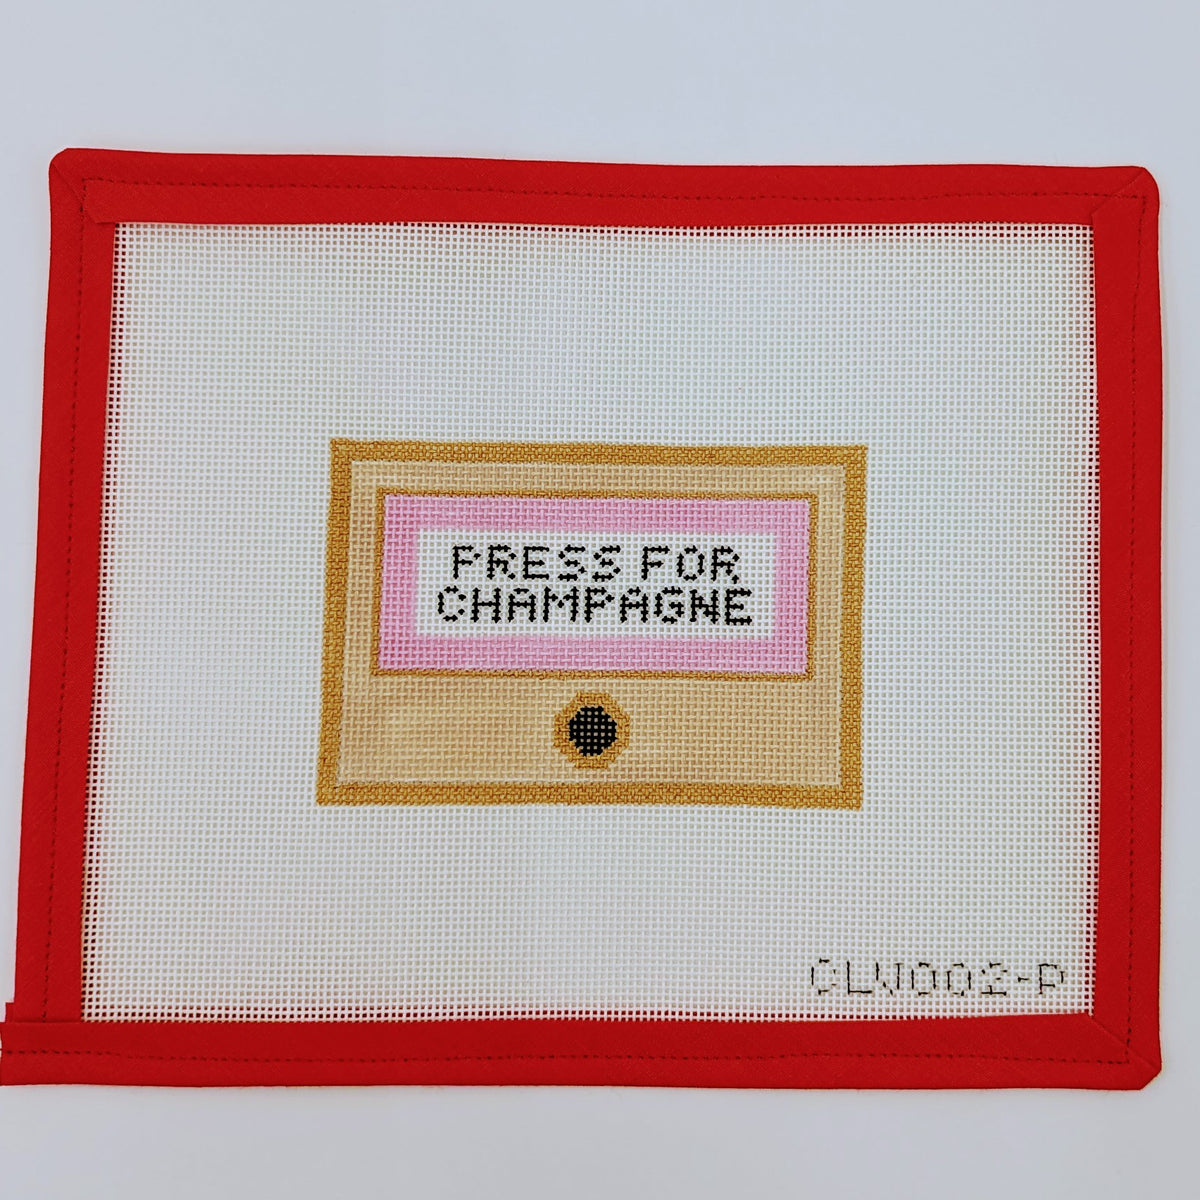 Press for Champagne (pink)